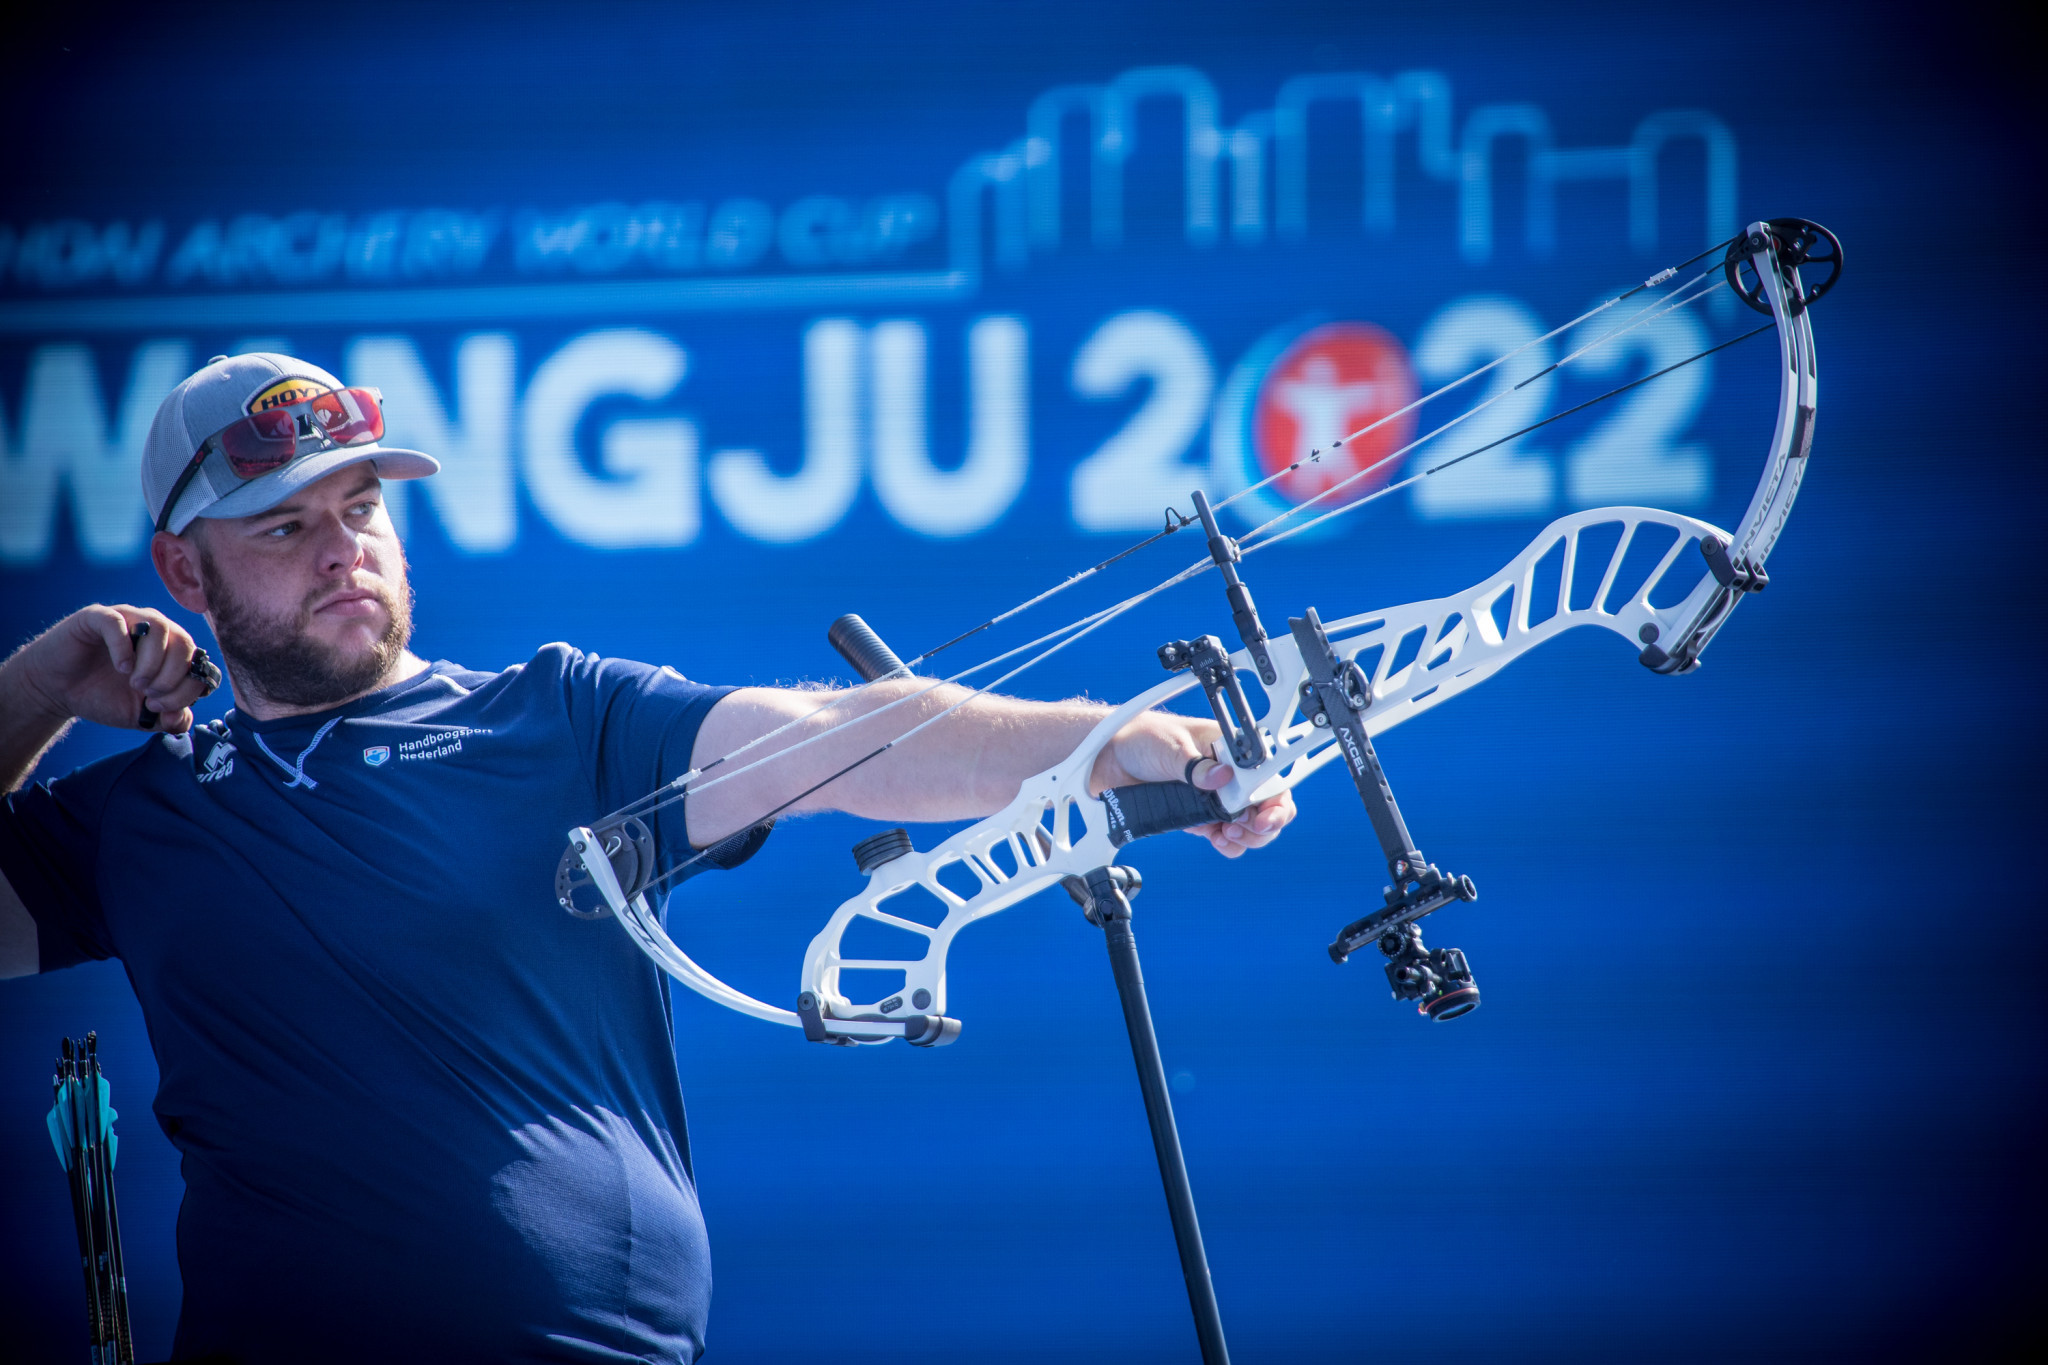 Mike Schloesser triumphed at the Archery World Cup ©Getty Images